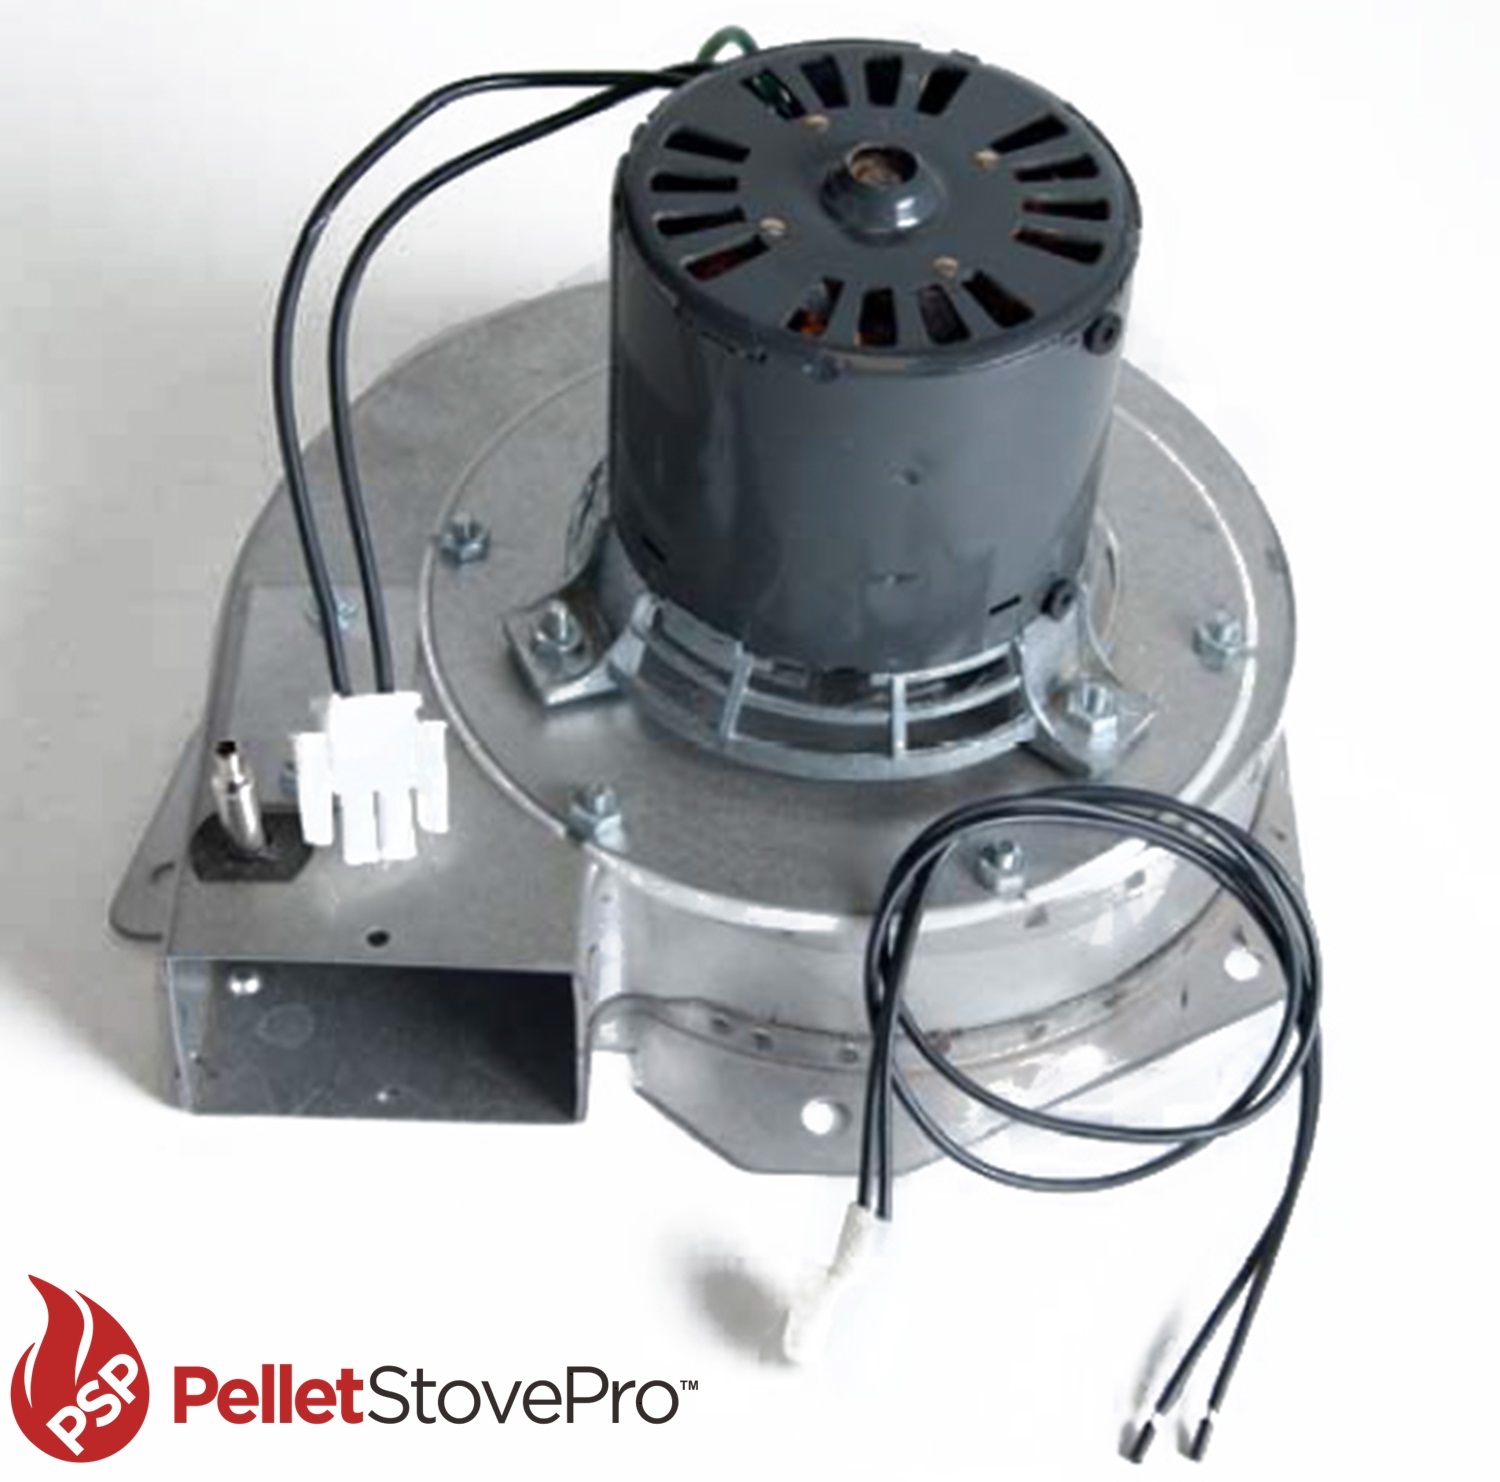 Whitfield Pellet Exhaust Combustion Motor Blower w Housing 10-1113 G by EnviroFire